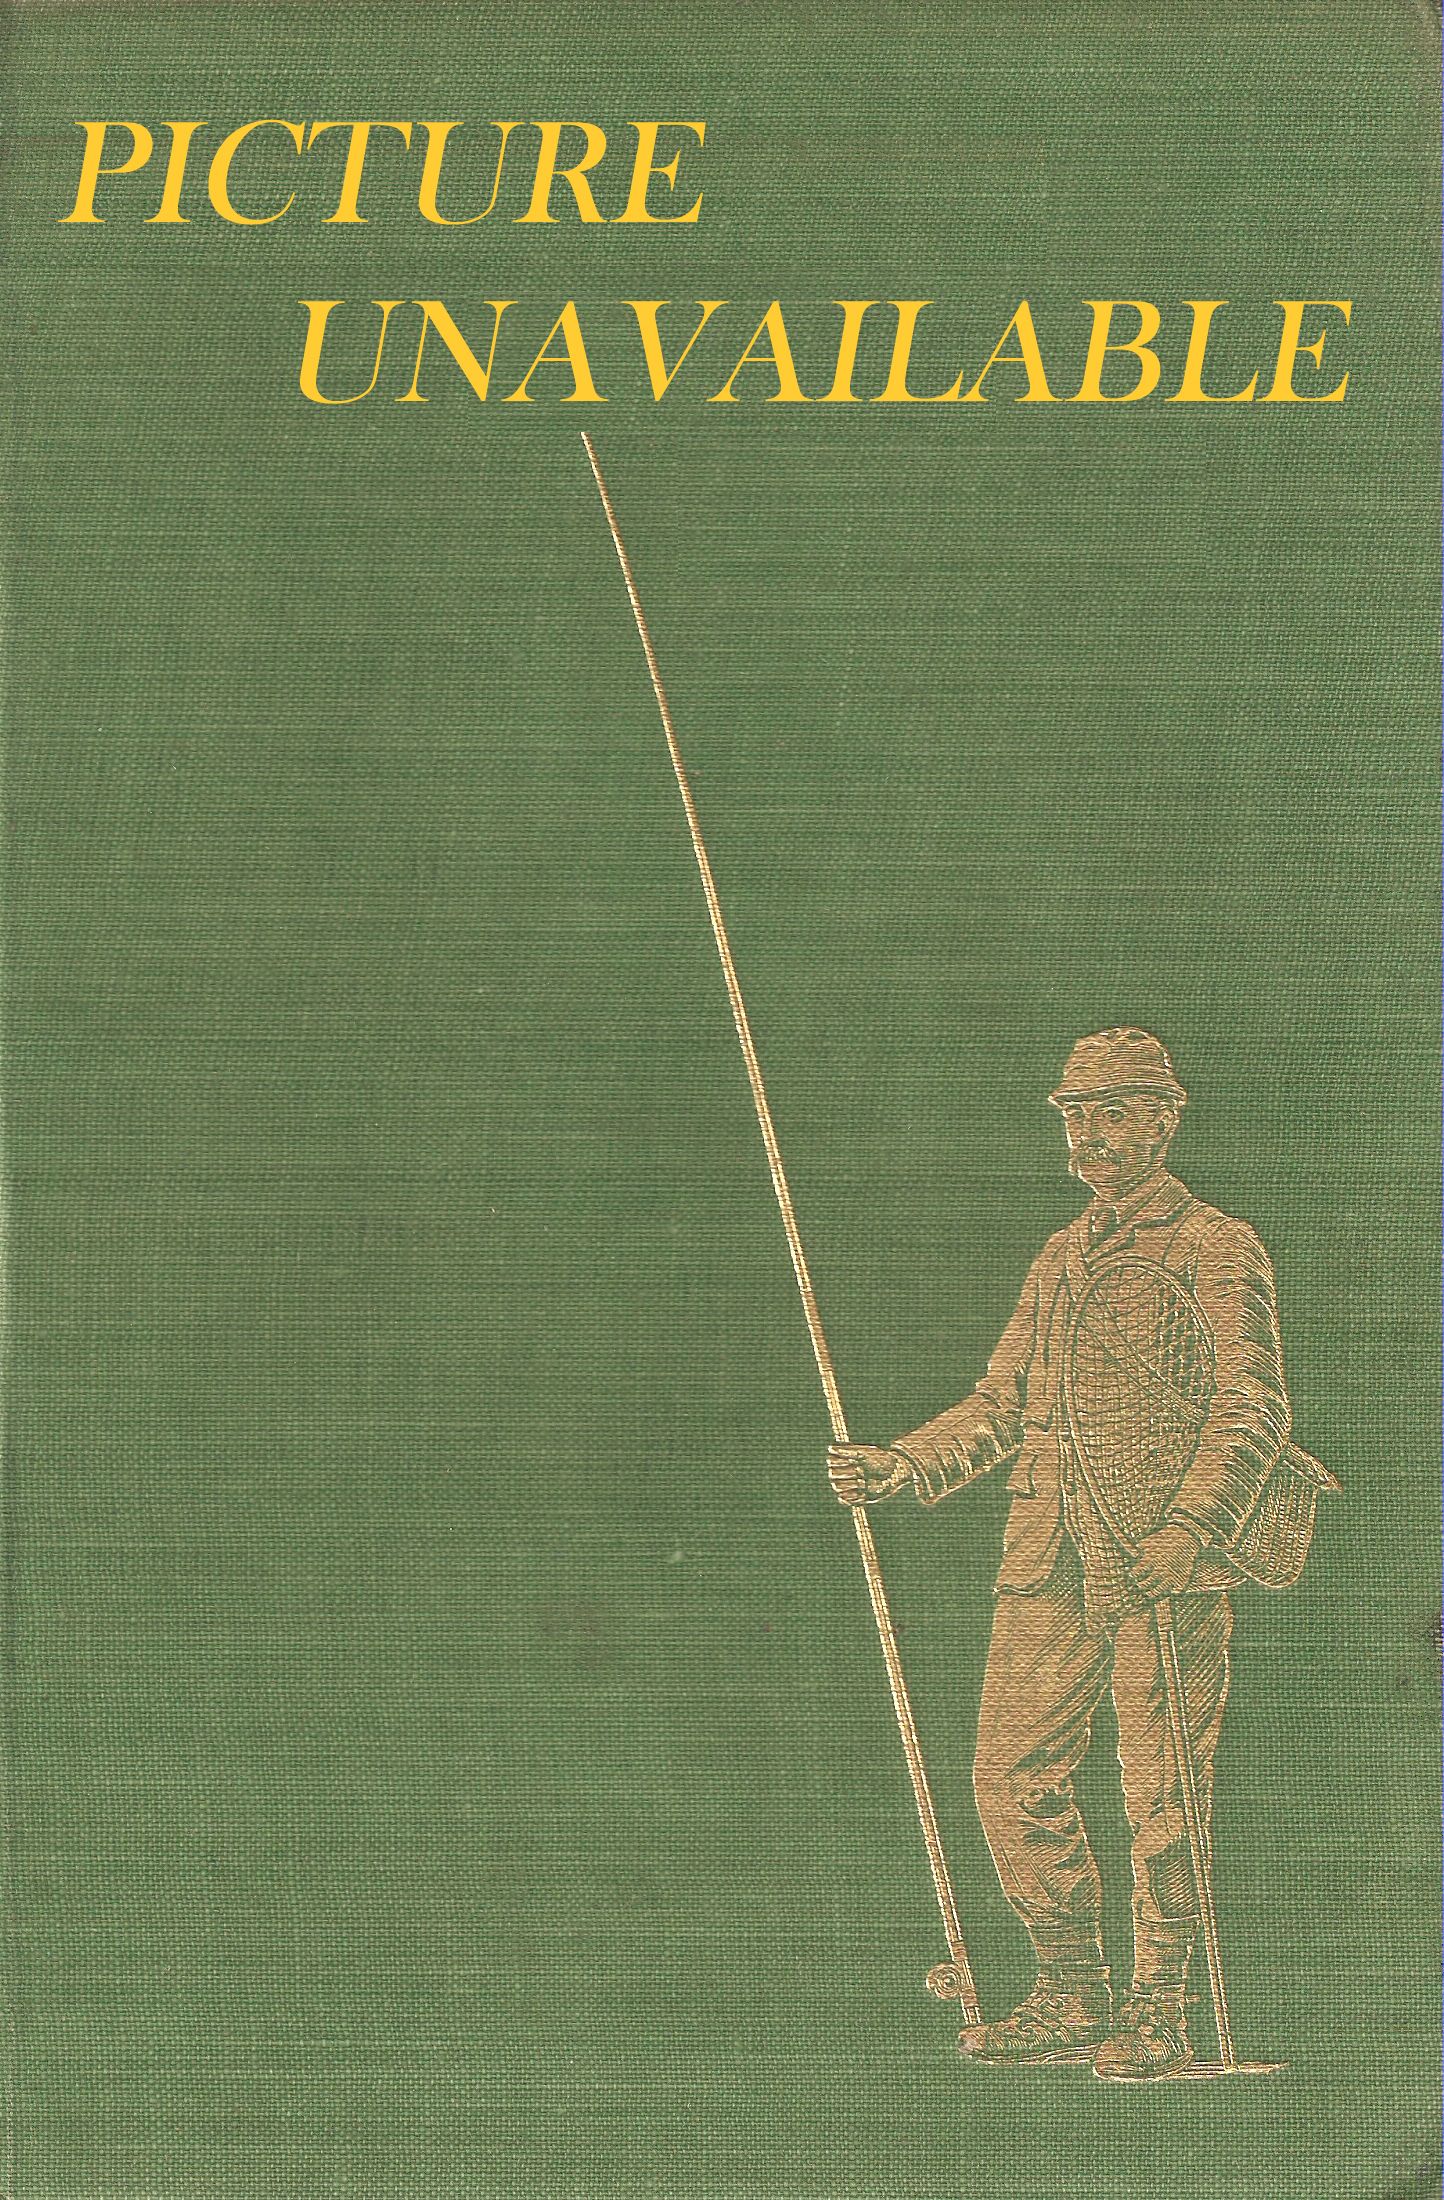 HARDY'S ANGLER'S GUIDES: 1883, 1888, 1894, 1900 and 1905. Five facsimile volumes.